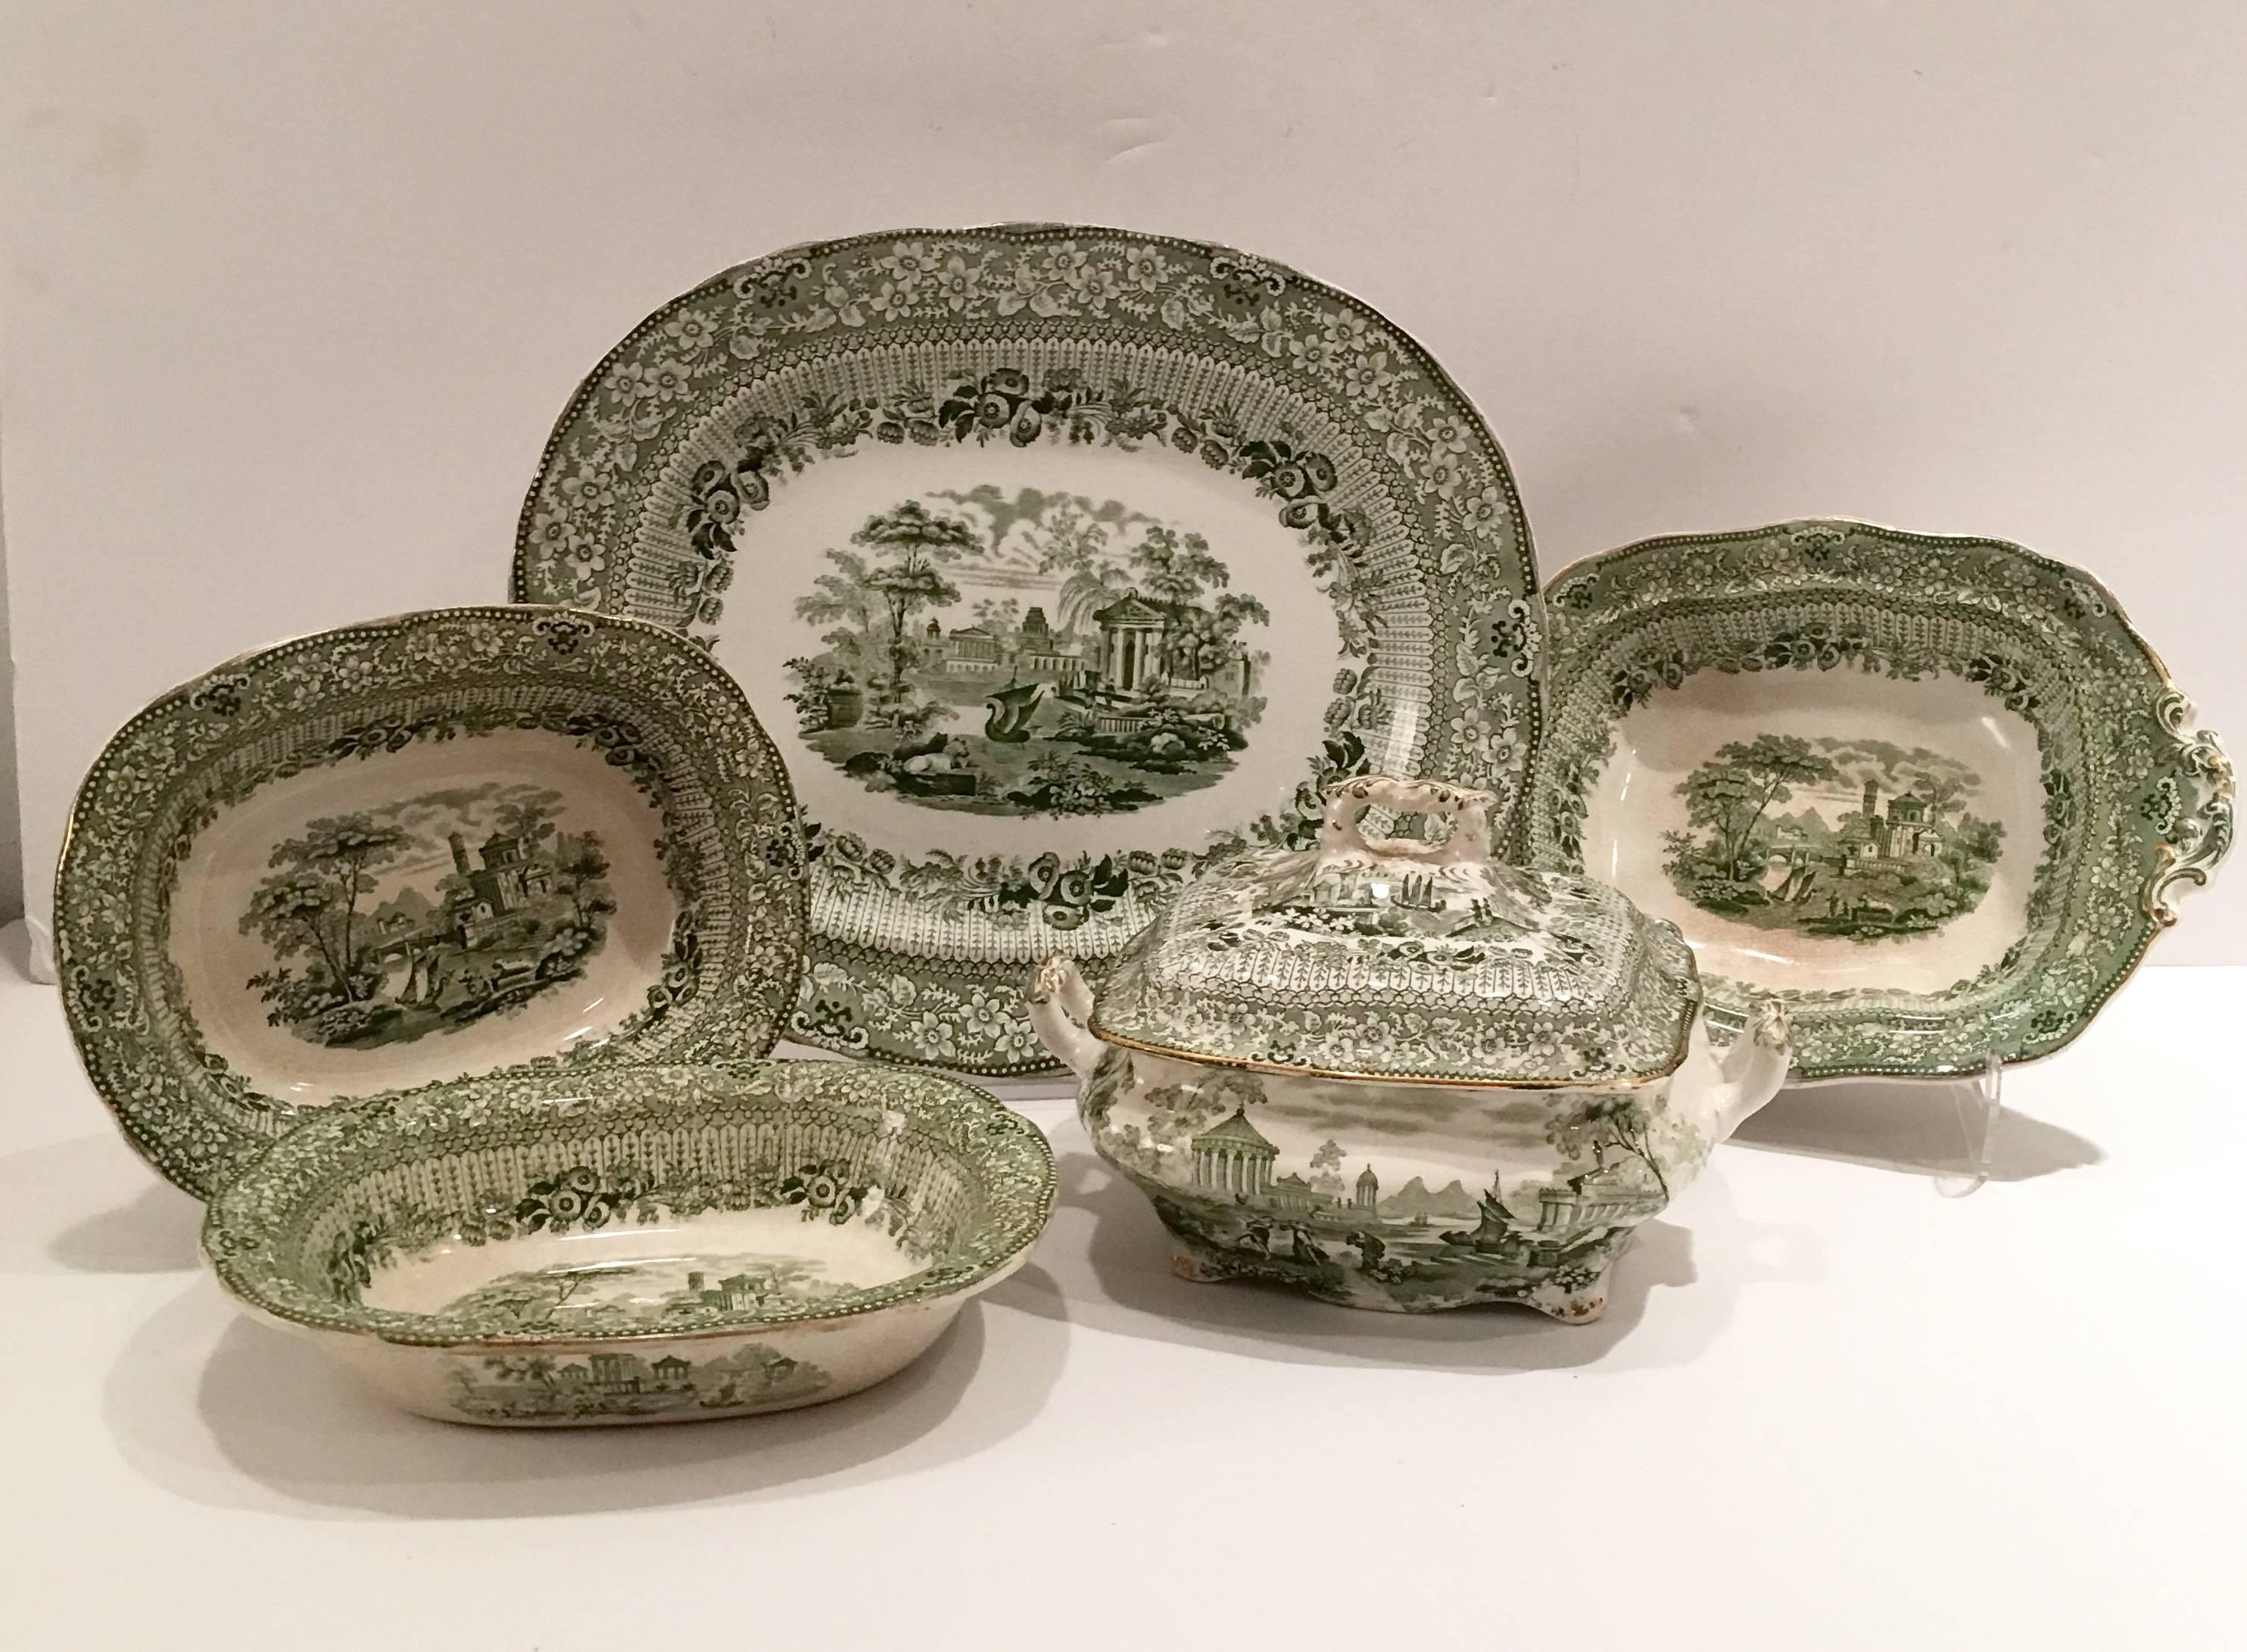 Rare antique William Ridgways "Grecian Green" China serving piece set of six. Central "Grecian" scenes motifs. Scalloped and 22-karat gold detail edge.
Set includes, two oval vegetable bowls, one large oval platter, one square